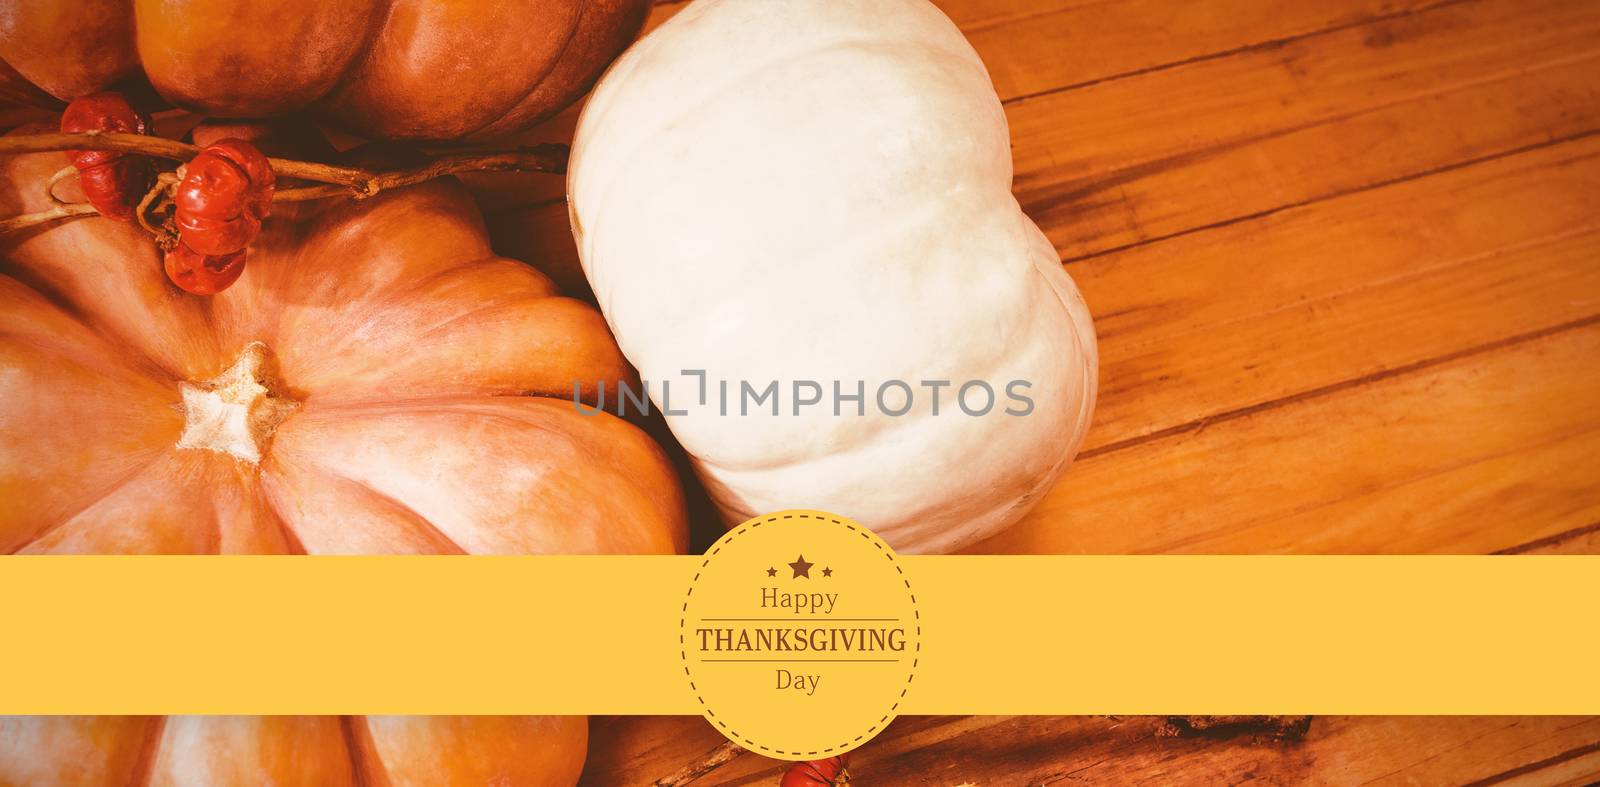 Happy thanksgiving against pumpkins with plant stems on table during halloween